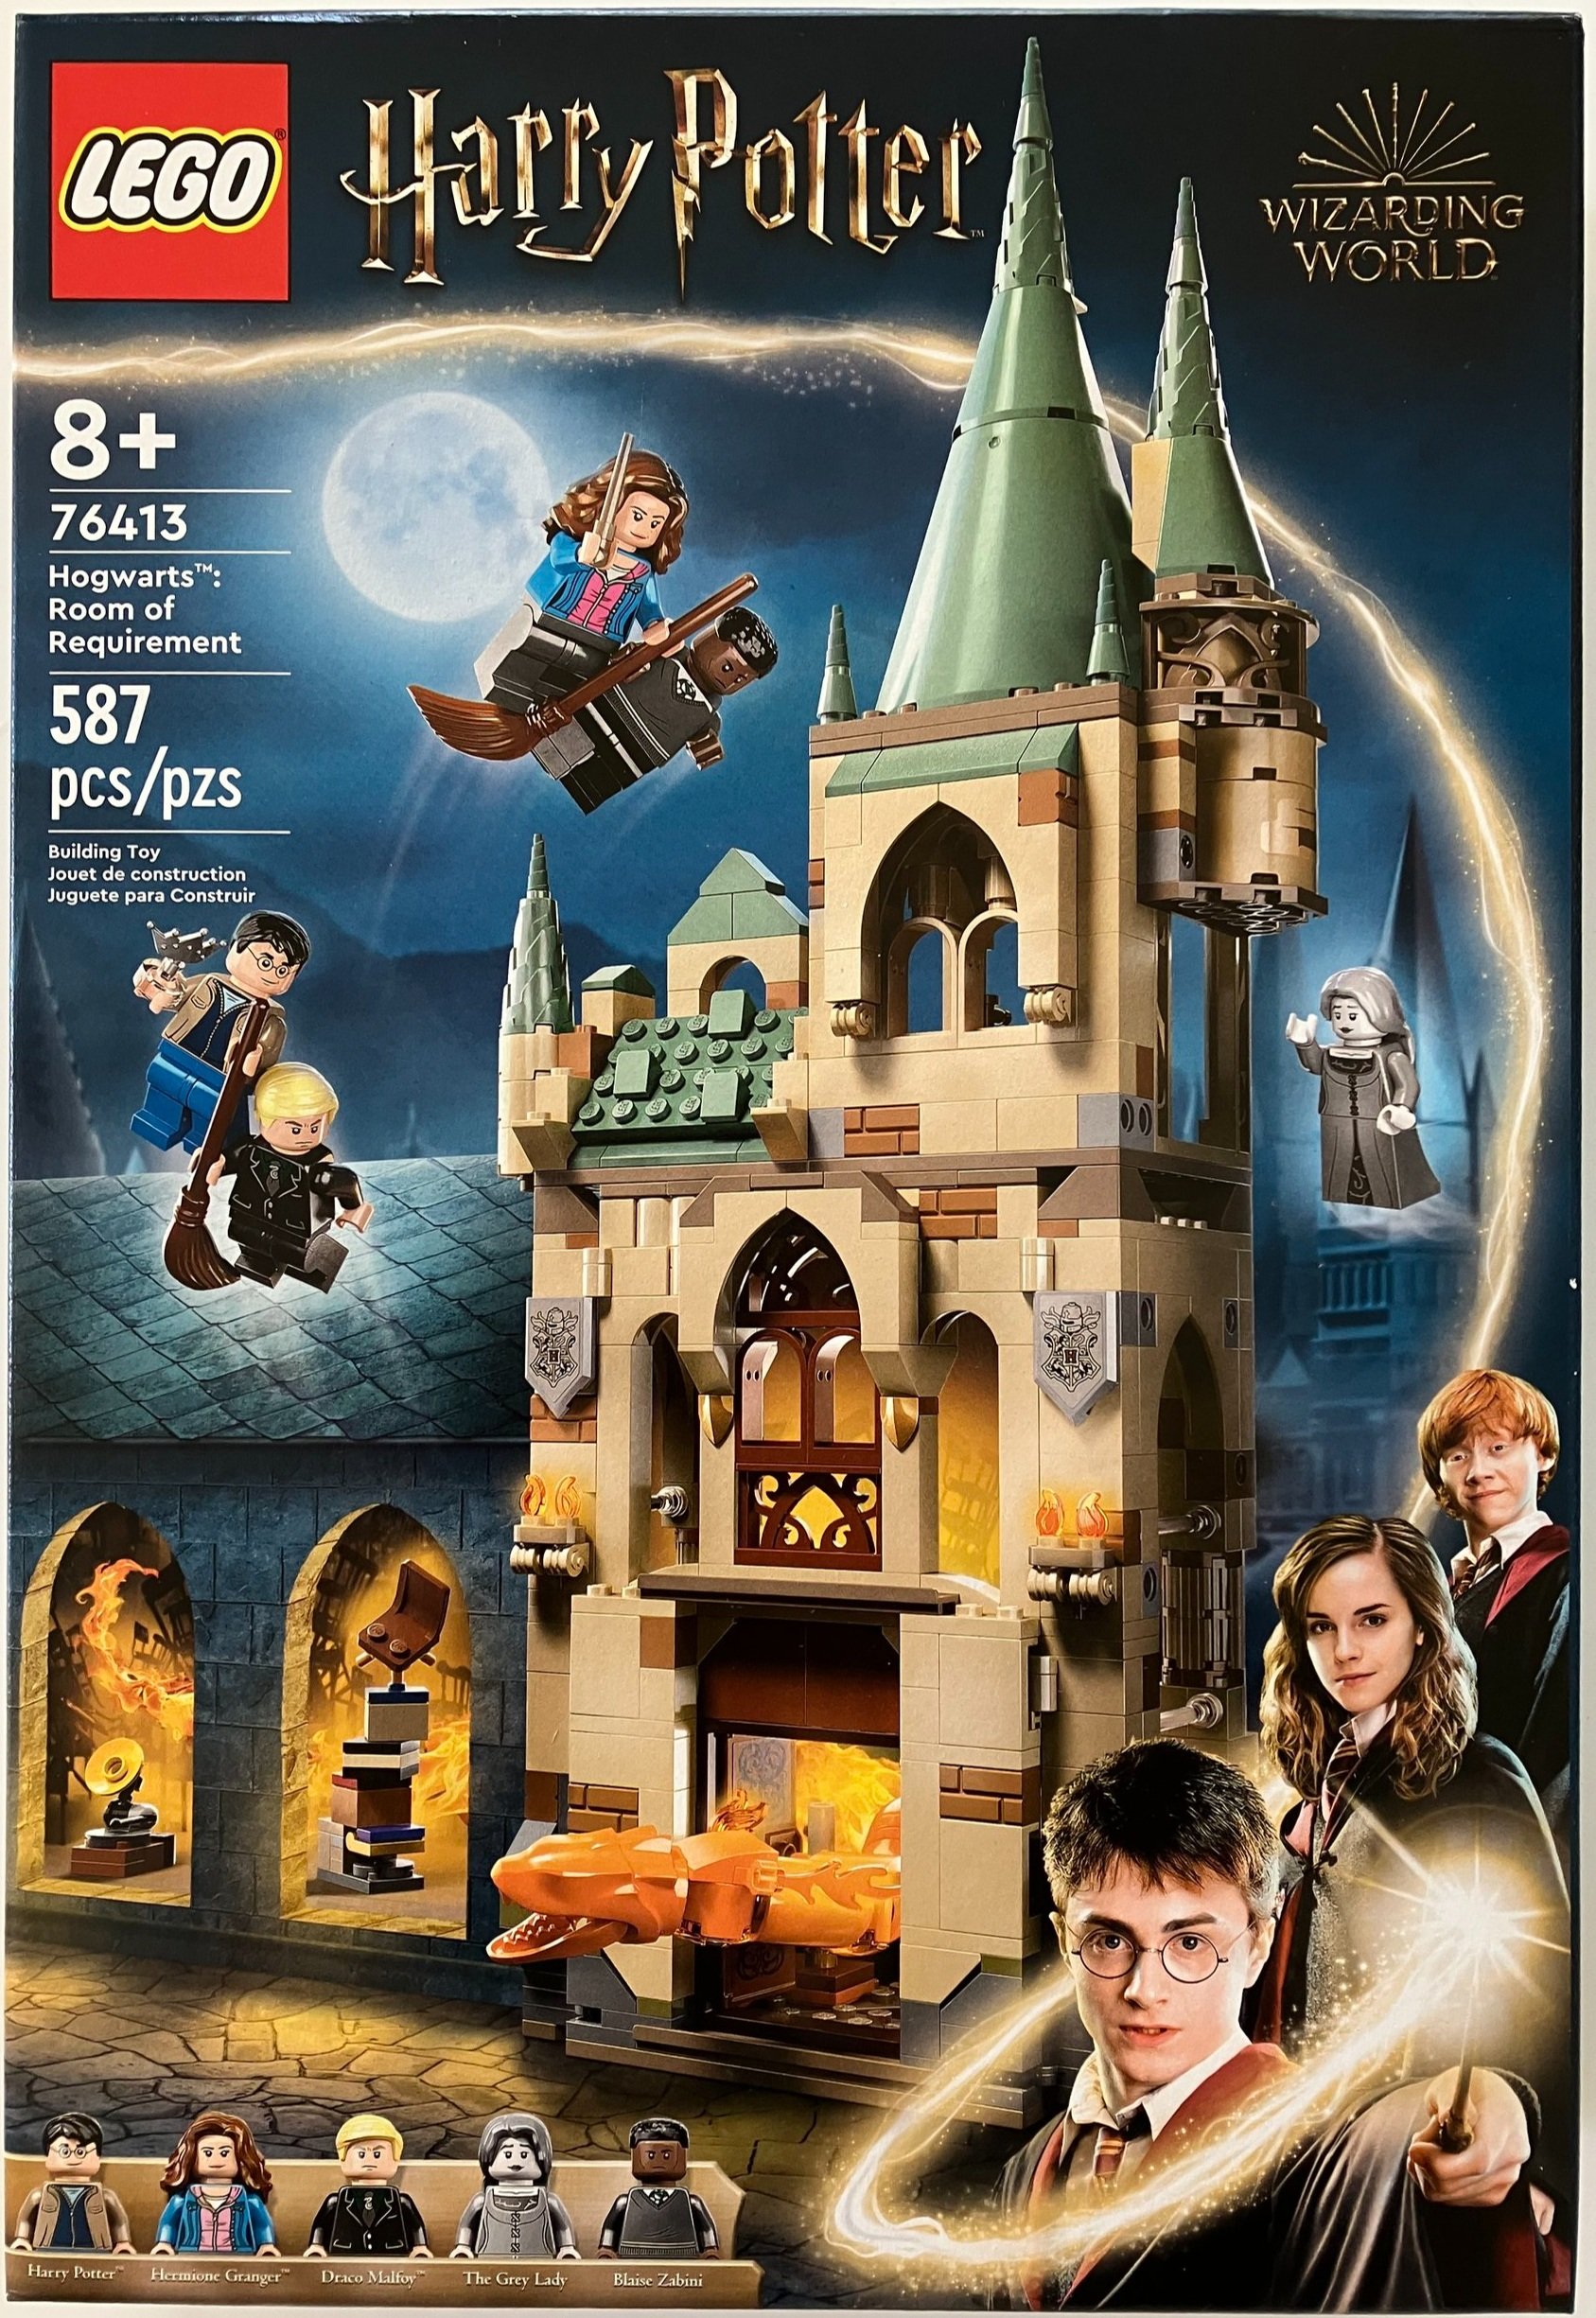 Harry Potter 30 page Sticker Book